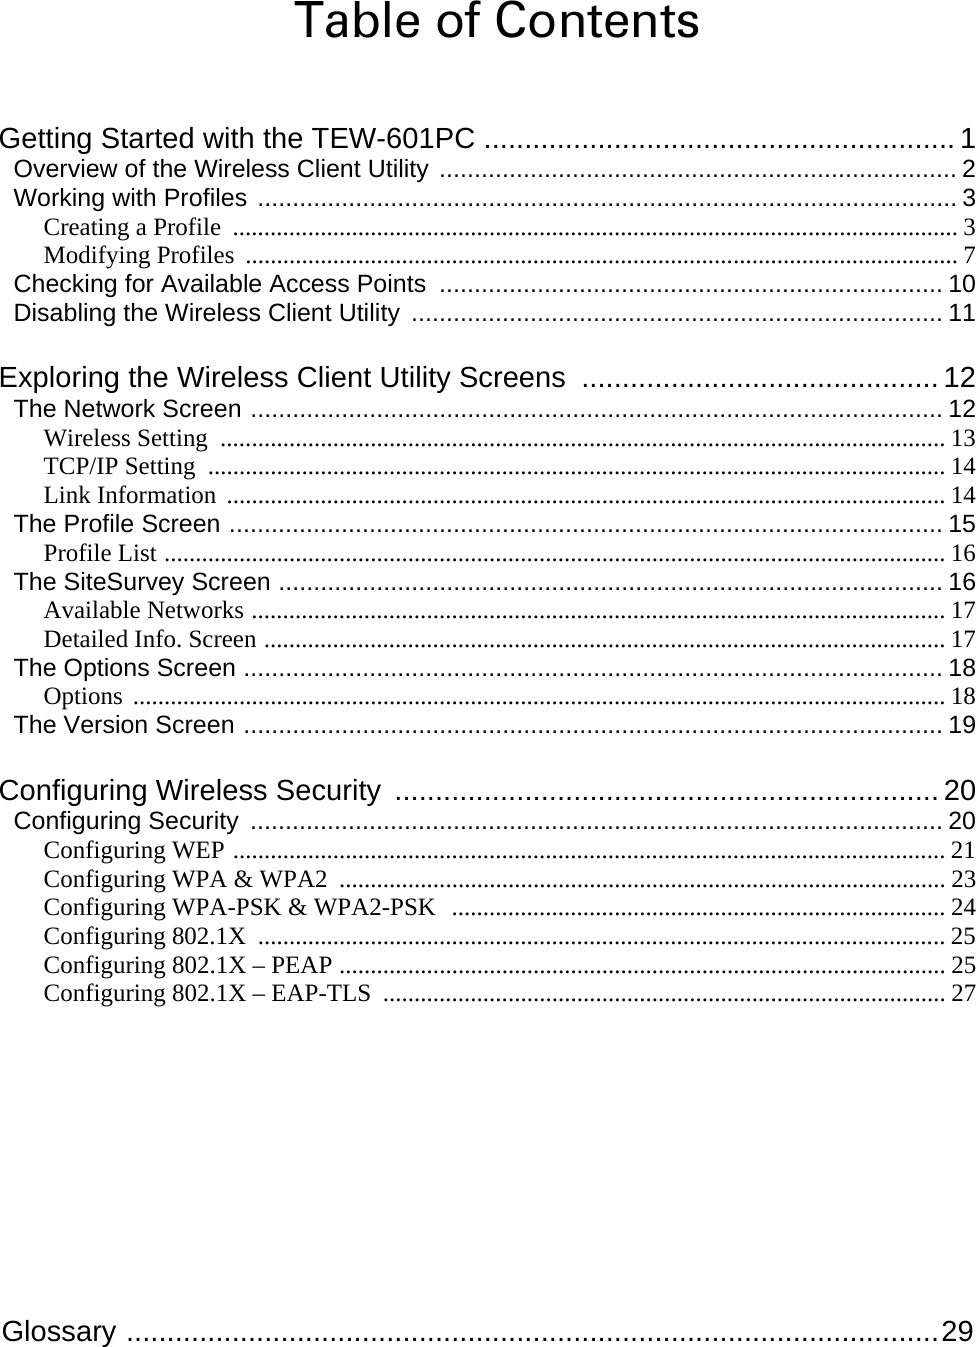  Glossary ....................................................................................................29 Table of Contents Getting Started with the TEW-601PC .......................................................... 1 Overview of the Wireless Client Utility .......................................................................... 2 Working with Profiles .................................................................................................... 3 Creating a Profile  .................................................................................................................... 3 Modifying Profiles  .................................................................................................................. 7 Checking for Available Access Points ........................................................................ 10 Disabling the Wireless Client Utility ............................................................................ 11 Exploring the Wireless Client Utility Screens  ............................................ 12 The Network Screen ................................................................................................... 12 Wireless Setting  .................................................................................................................... 13 TCP/IP Setting  ...................................................................................................................... 14 Link Information  ................................................................................................................... 14 The Profile Screen ...................................................................................................... 15 Profile List ............................................................................................................................. 16 The SiteSurvey Screen ............................................................................................... 16 Available Networks ............................................................................................................... 17 Detailed Info. Screen ............................................................................................................. 17 The Options Screen .................................................................................................... 18 Options .................................................................................................................................. 18 The Version Screen .................................................................................................... 19 Configuring Wireless Security  ................................................................... 20 Configuring Security ................................................................................................... 20 Configuring WEP .................................................................................................................. 21 Configuring WPA &amp; WPA2  ................................................................................................. 23 Configuring WPA-PSK &amp; WPA2-PSK  ............................................................................... 24 Configuring 802.1X  .............................................................................................................. 25 Configuring 802.1X – PEAP ................................................................................................. 25 Configuring 802.1X – EAP-TLS  .......................................................................................... 27 